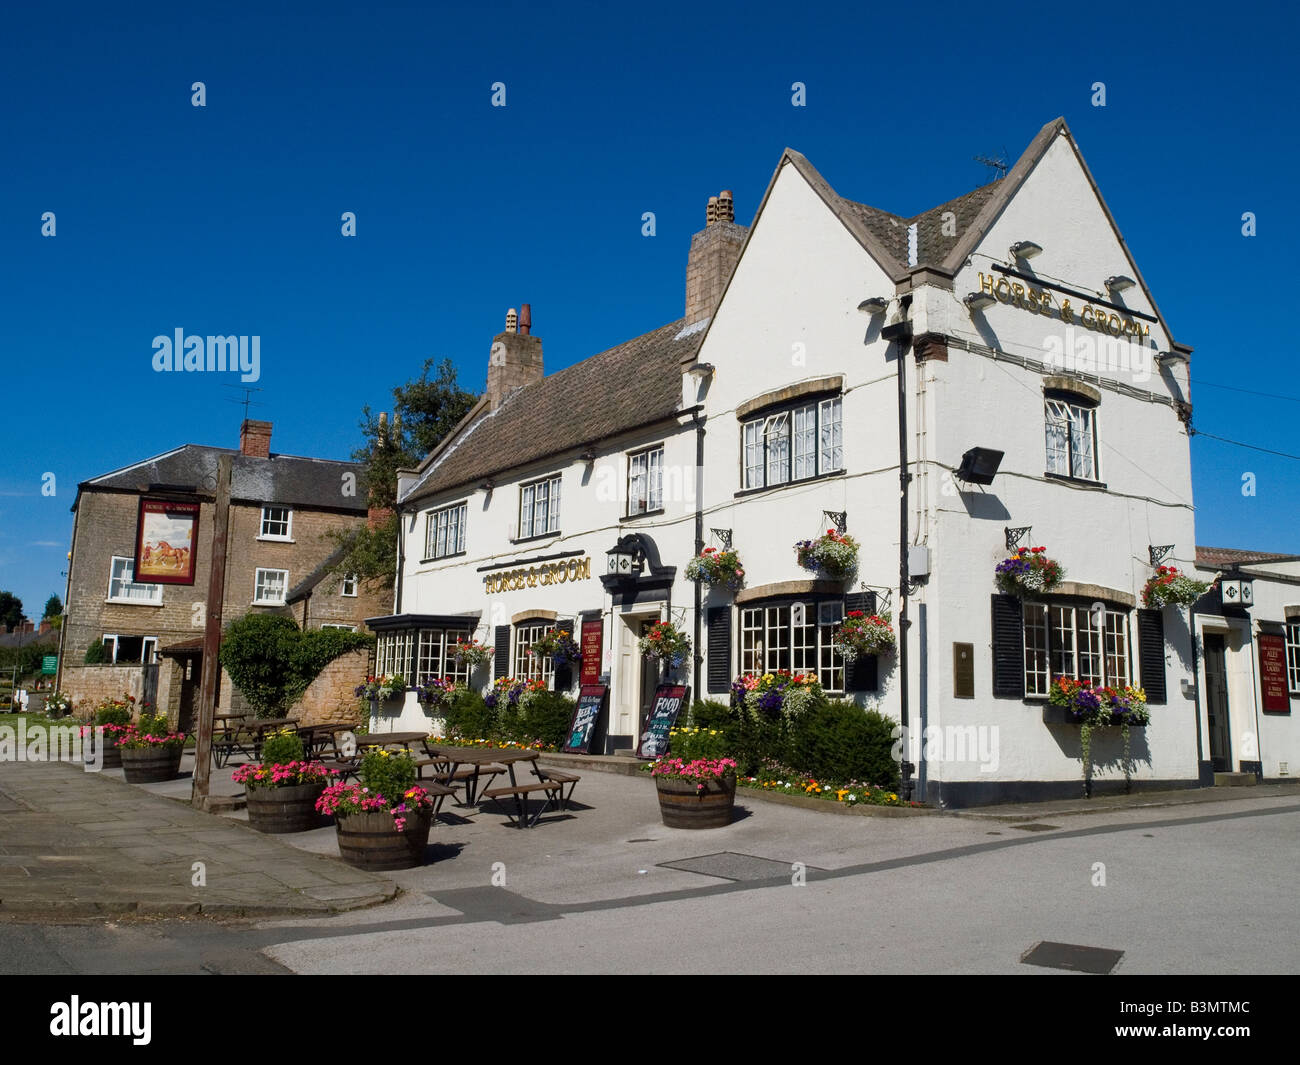 The Horse and Groom public house in the village of Linby, Nottinghamshire England Stock Photo